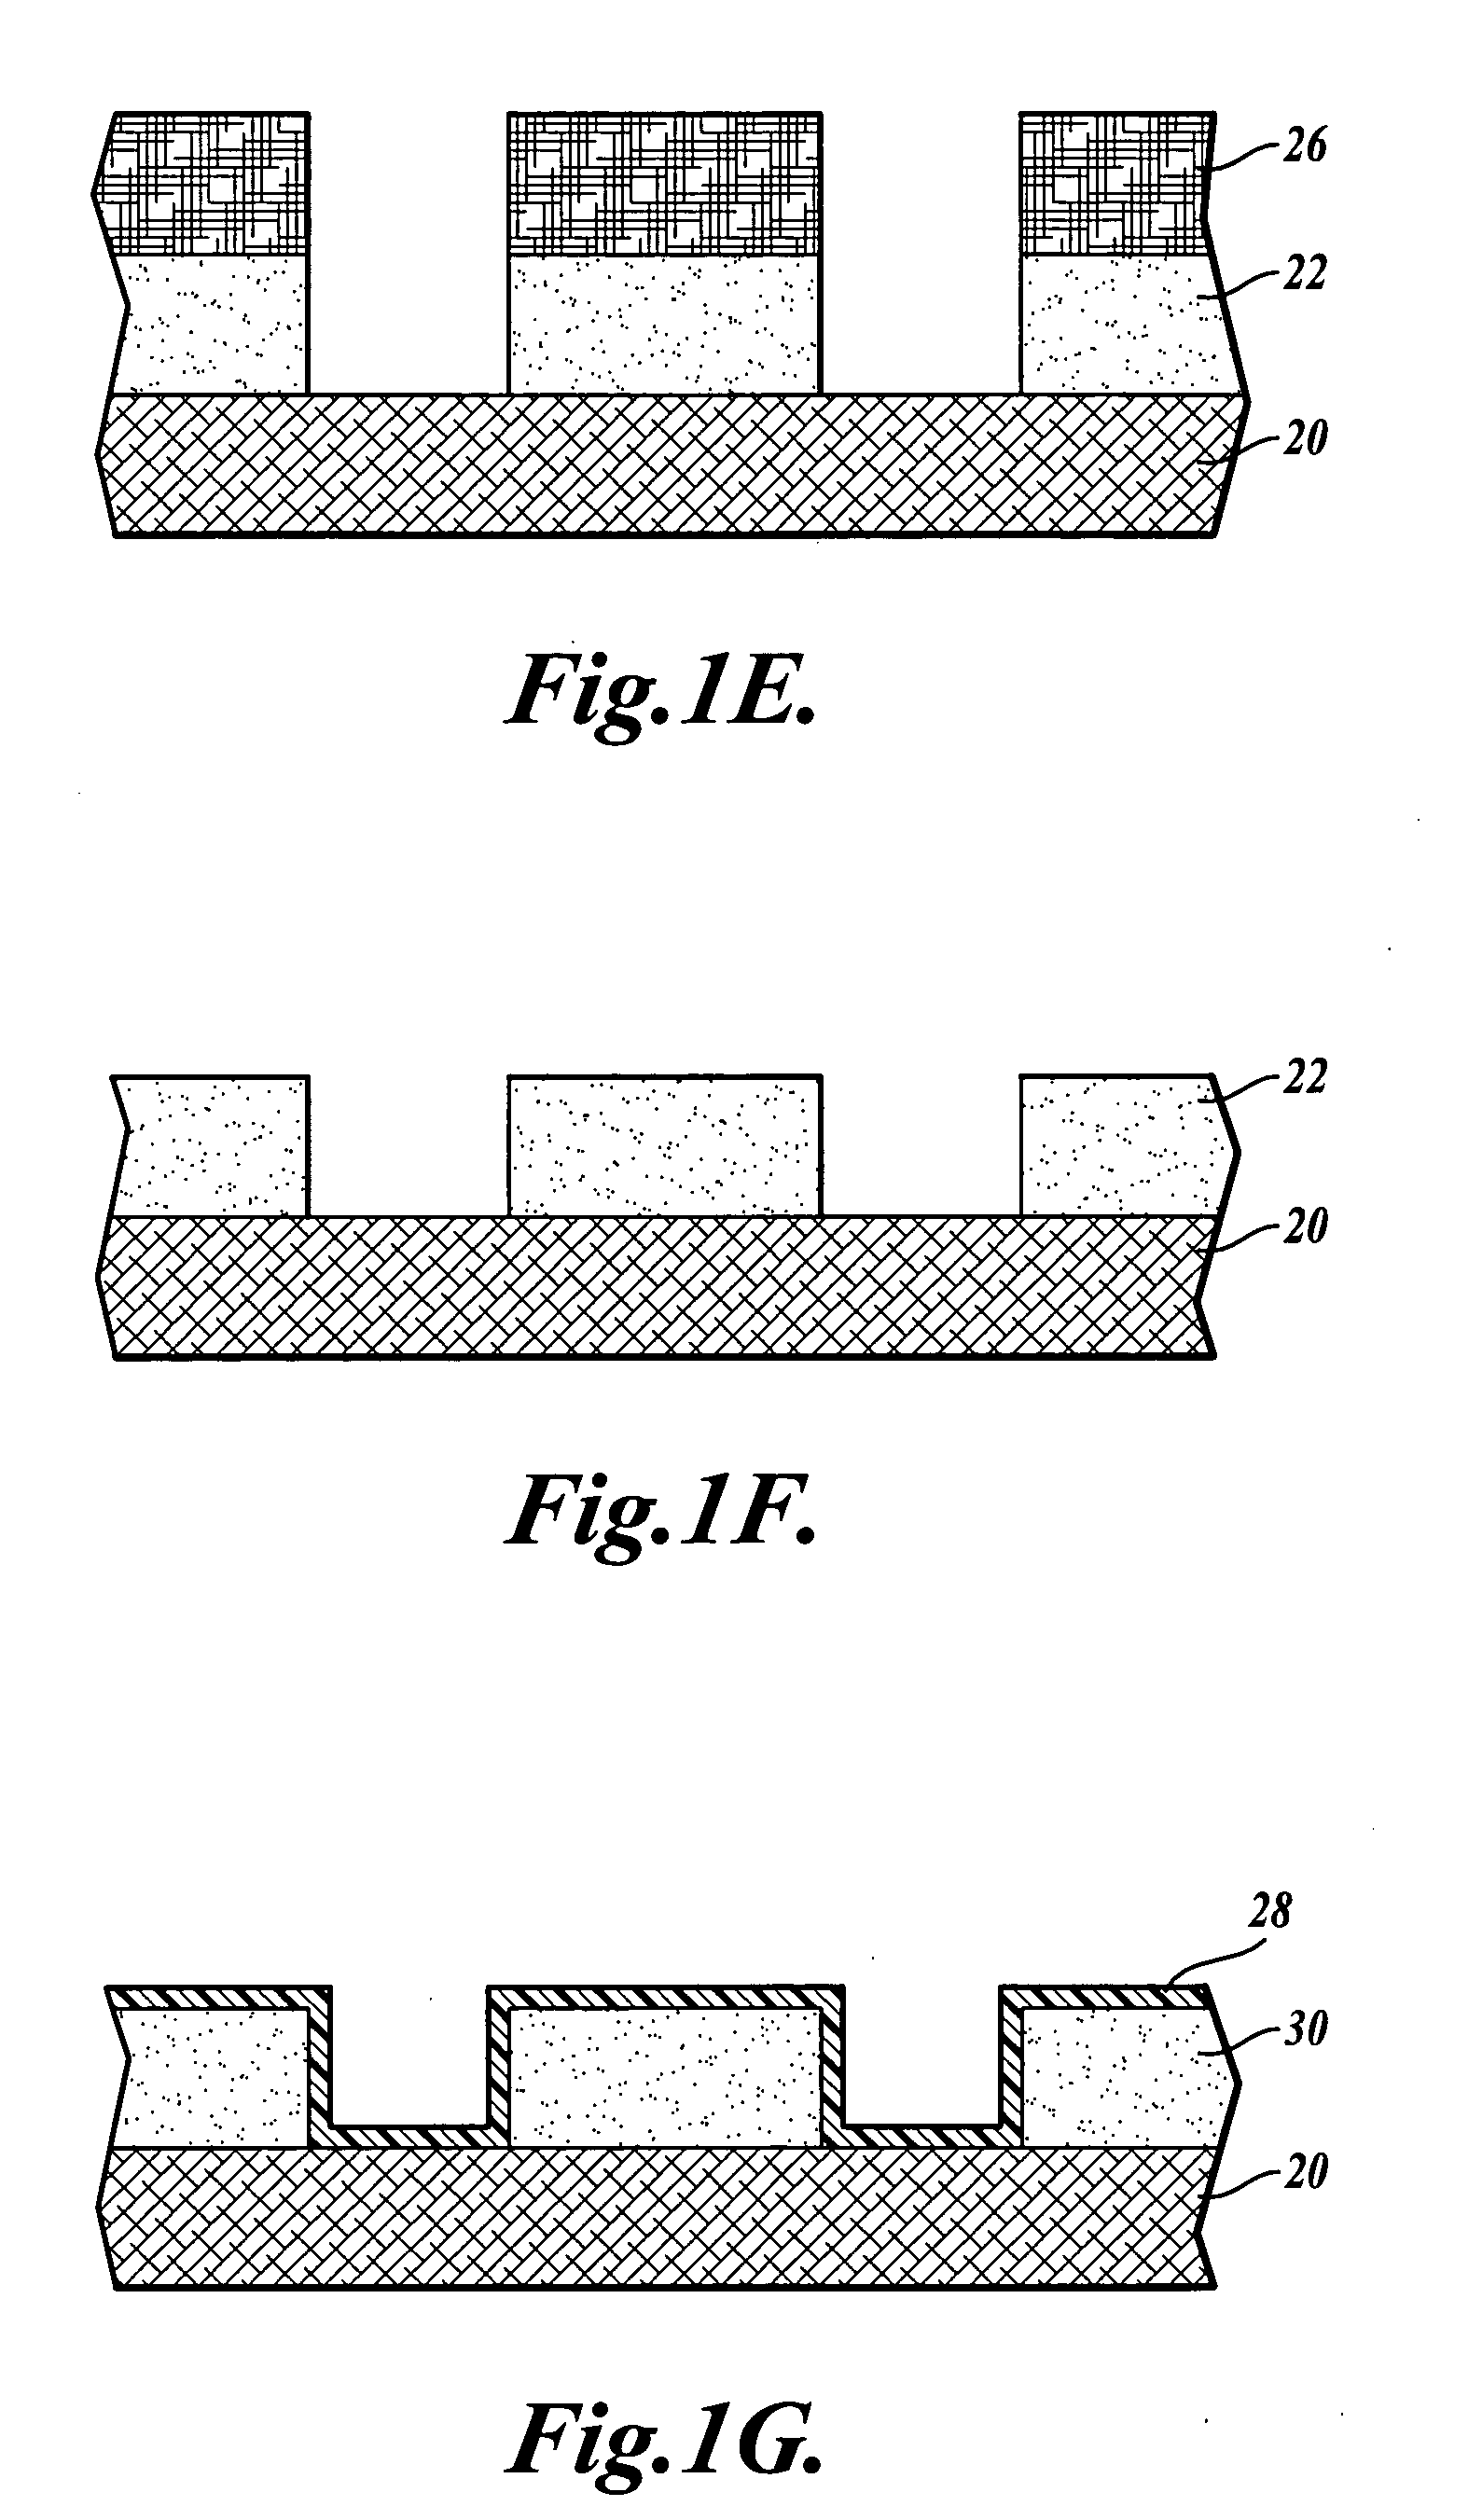 Baths, methods, and tools for superconformal deposition of conductive materials other than copper